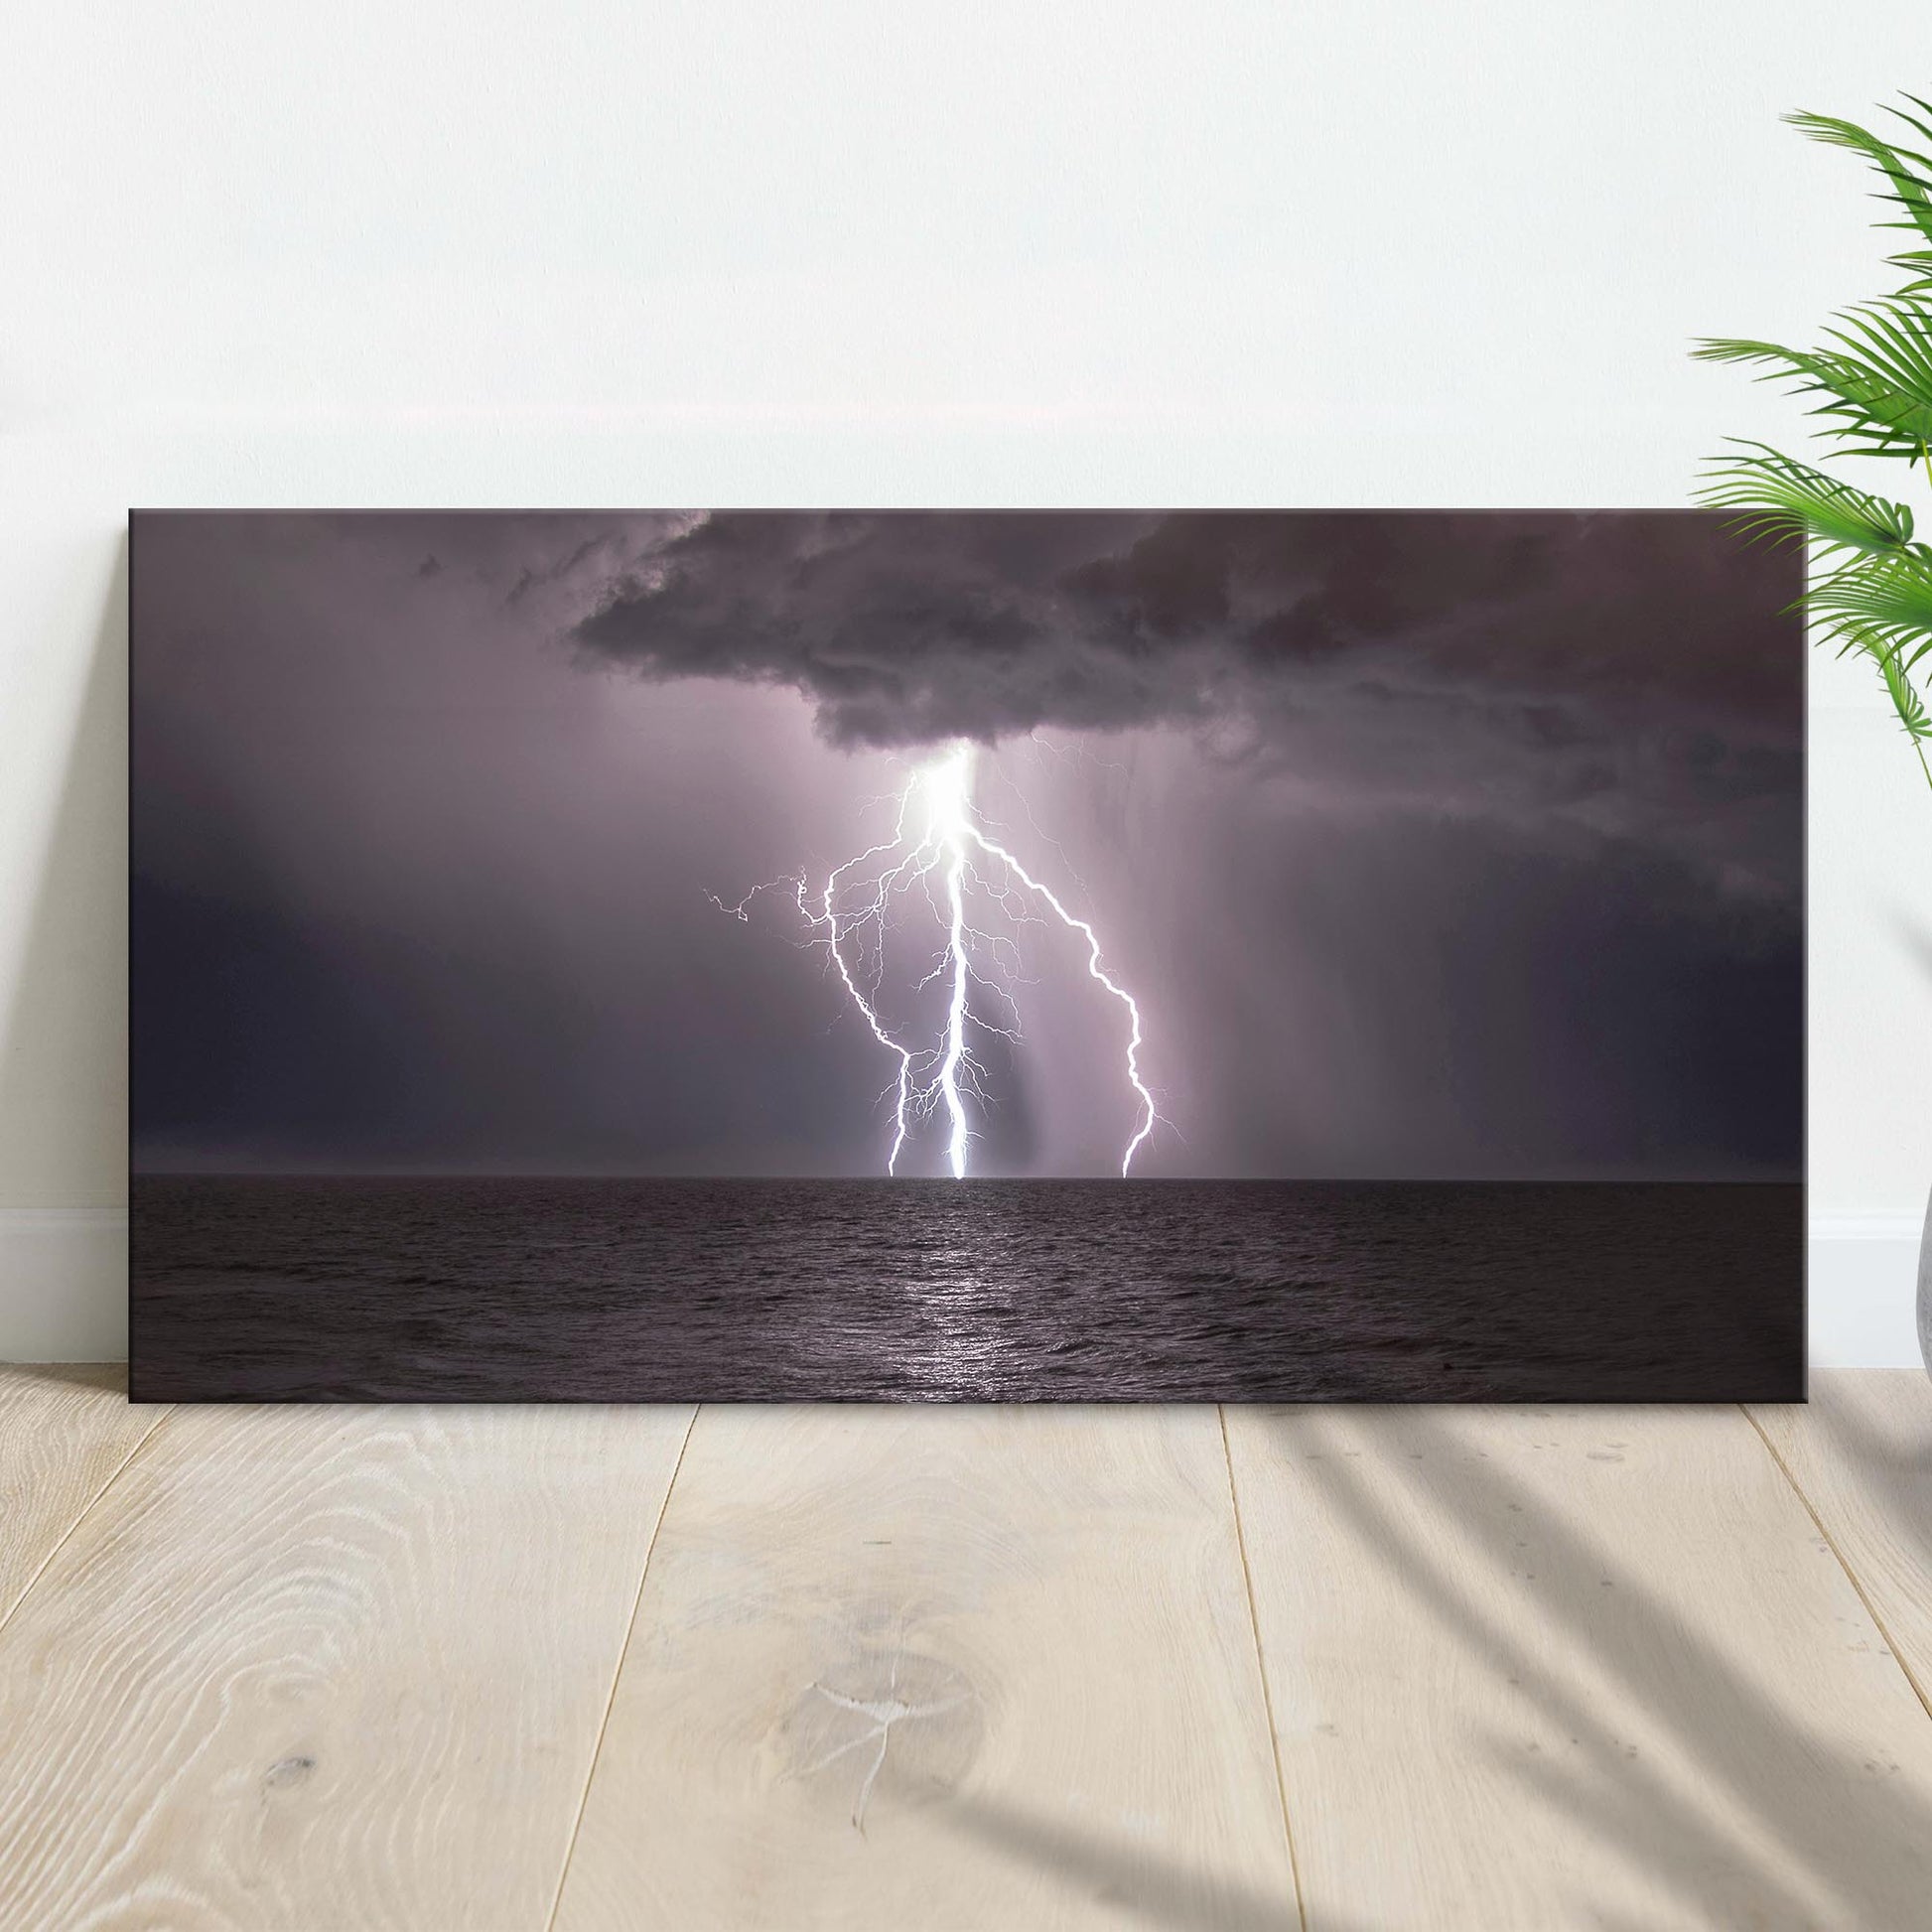 Ocean Thunder Storm Bolt Canvas Wall Art - Image by Tailored Canvases